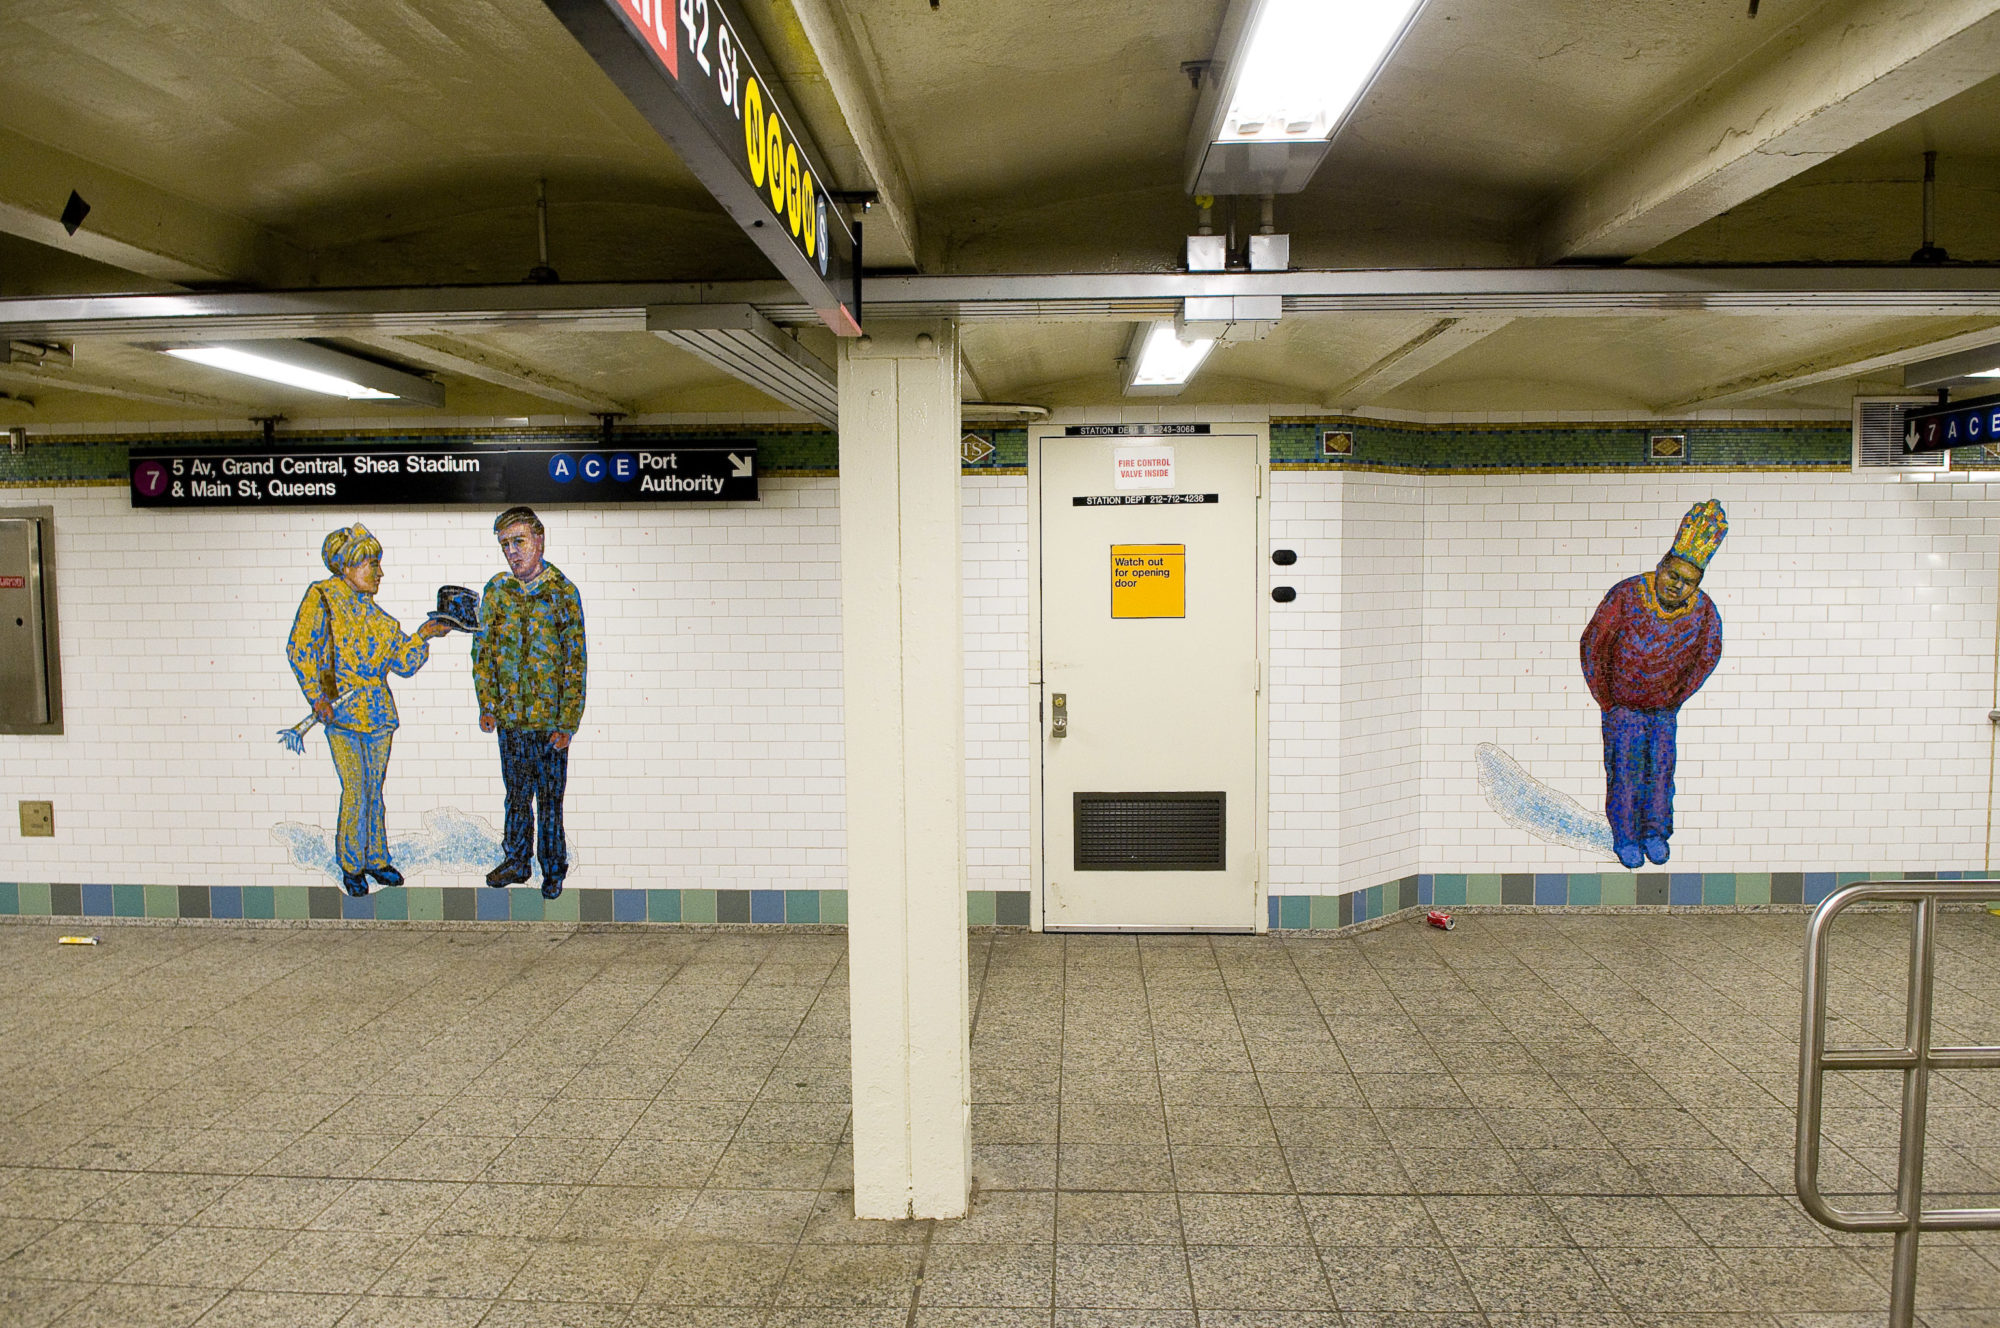 A picture of two mosaics at a subway station